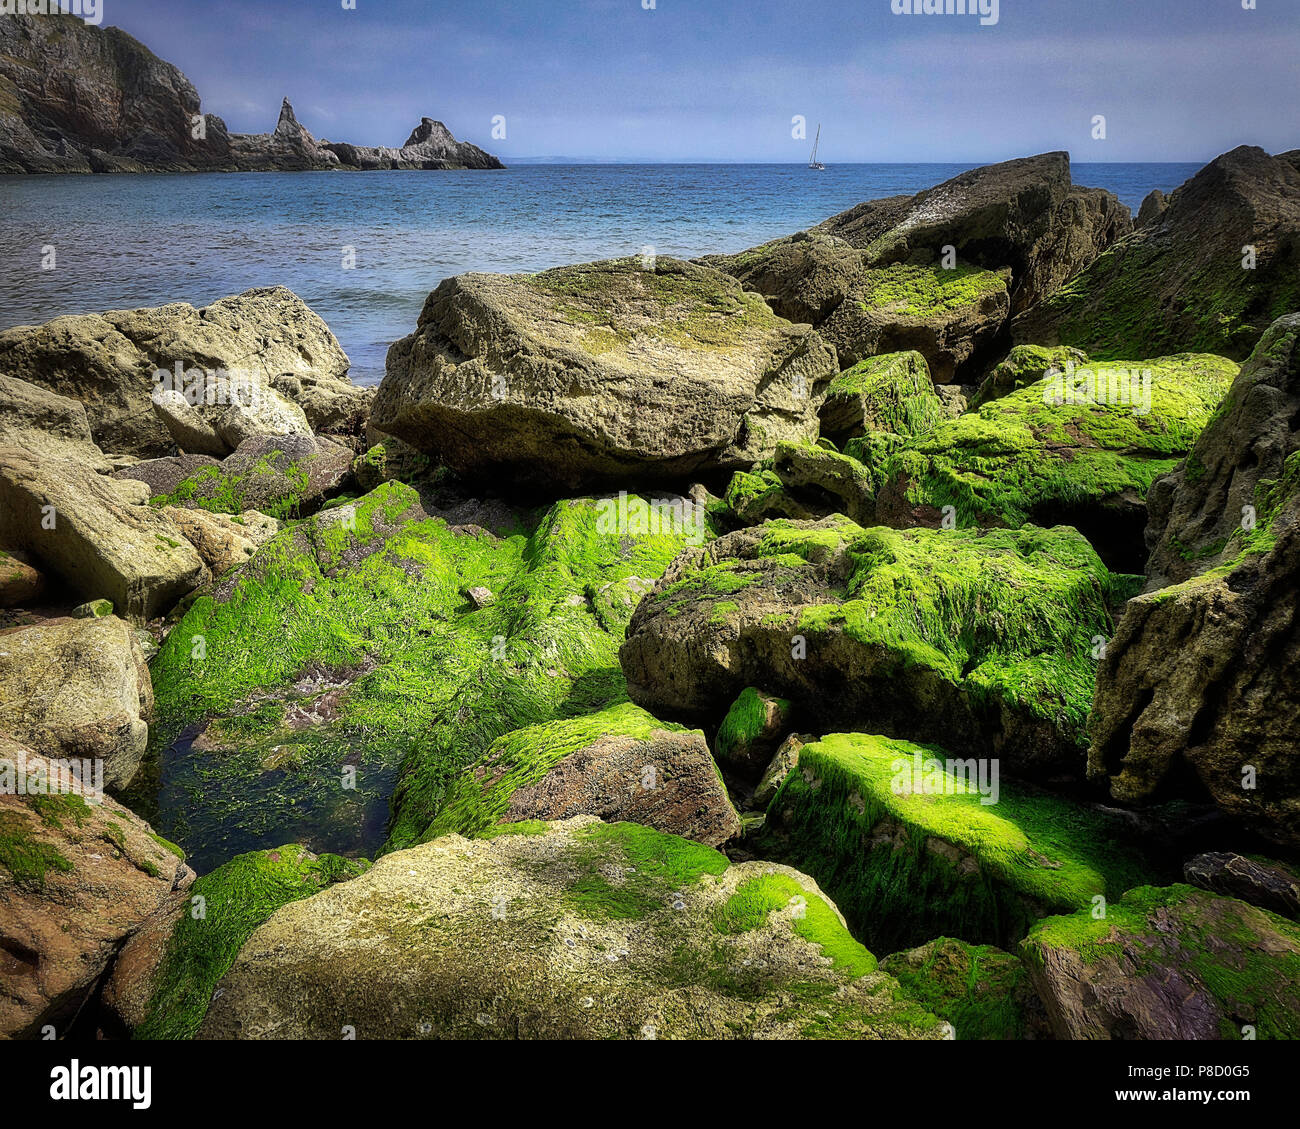 GB - DEVON: Ansteys Cove between Babbacombe and Torquay (HDR Image) Stock Photo